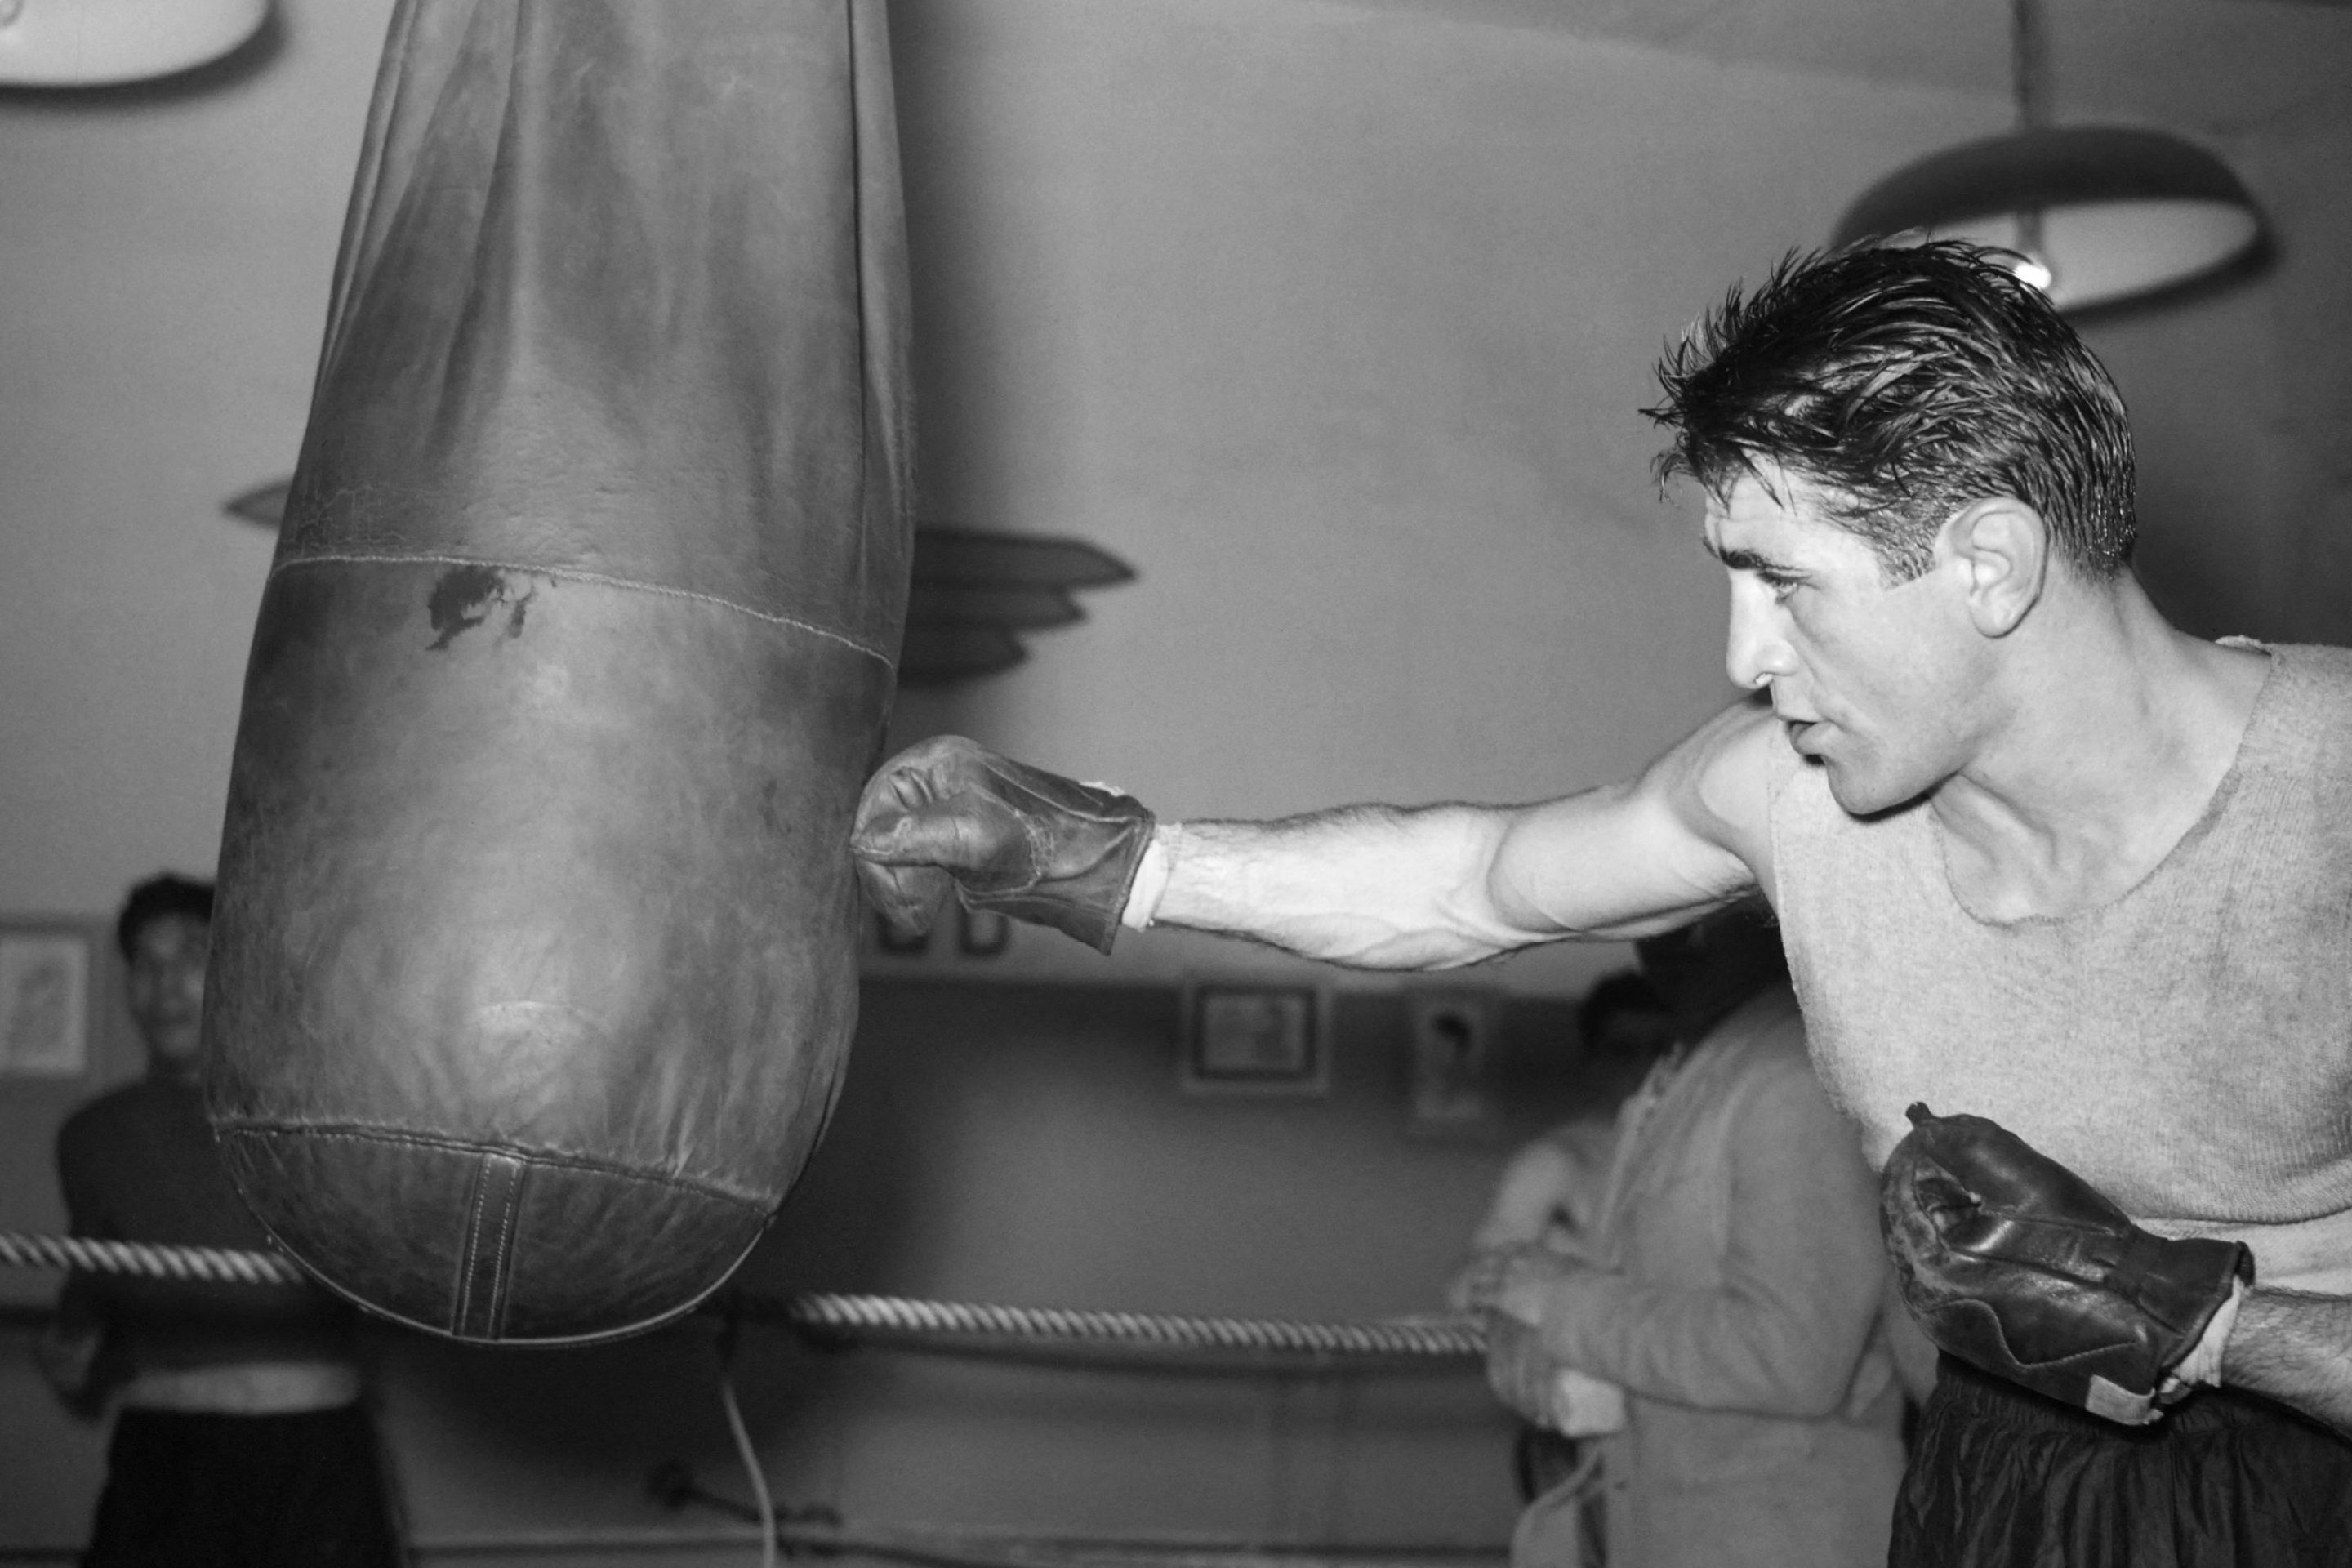 French boxer Laurent Dauthuille trains on October 27, 1946 at the Palais sed Sports in Paris before his match against Robert Charron.